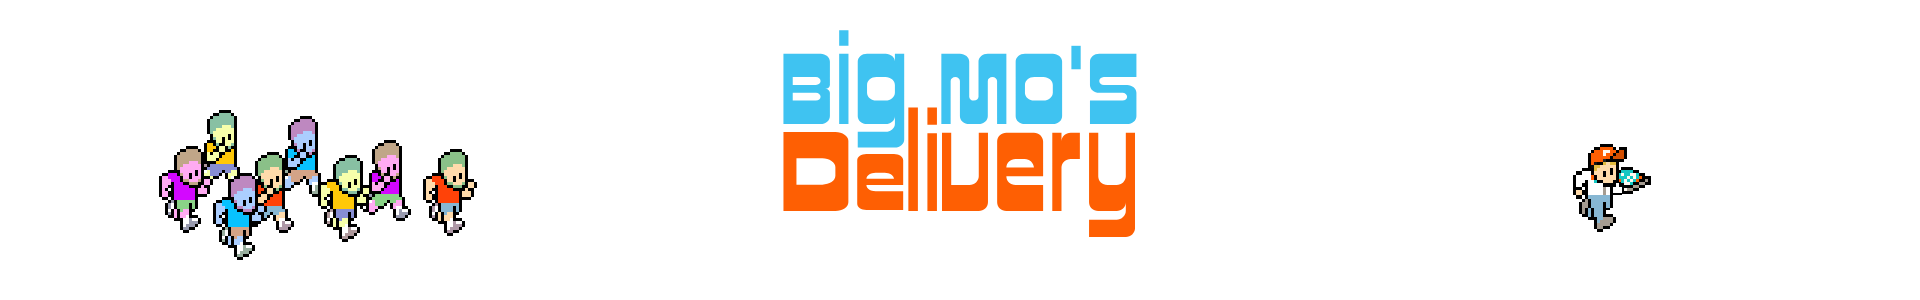 Big Mo's Delivery